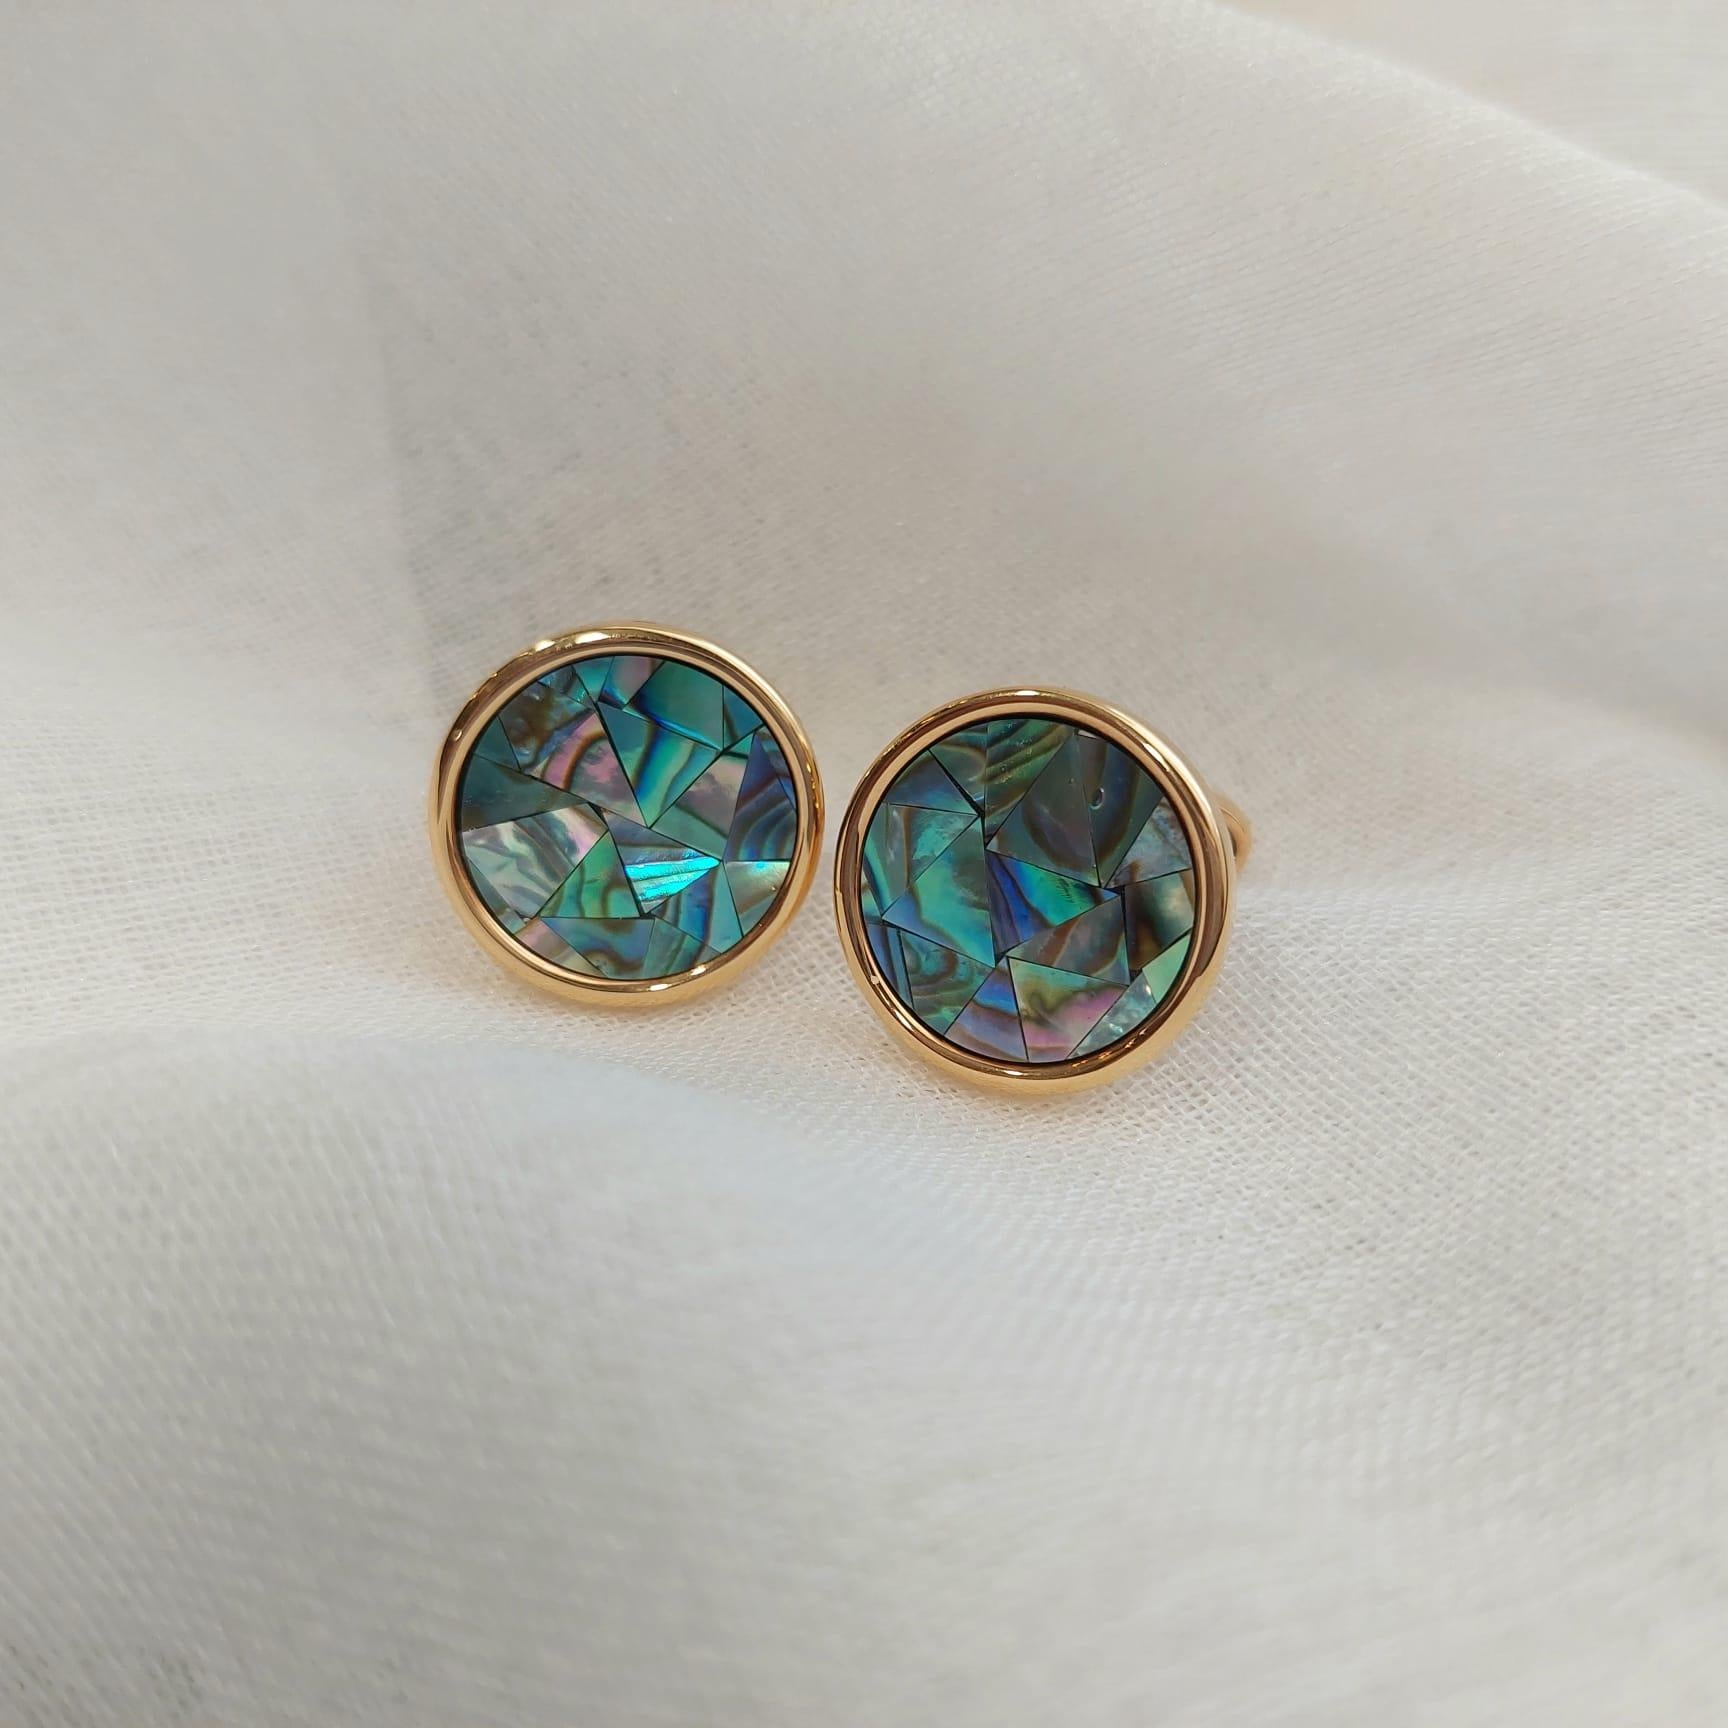 Abalone Mosaic Cufflinks set in the 18K yellow gold.